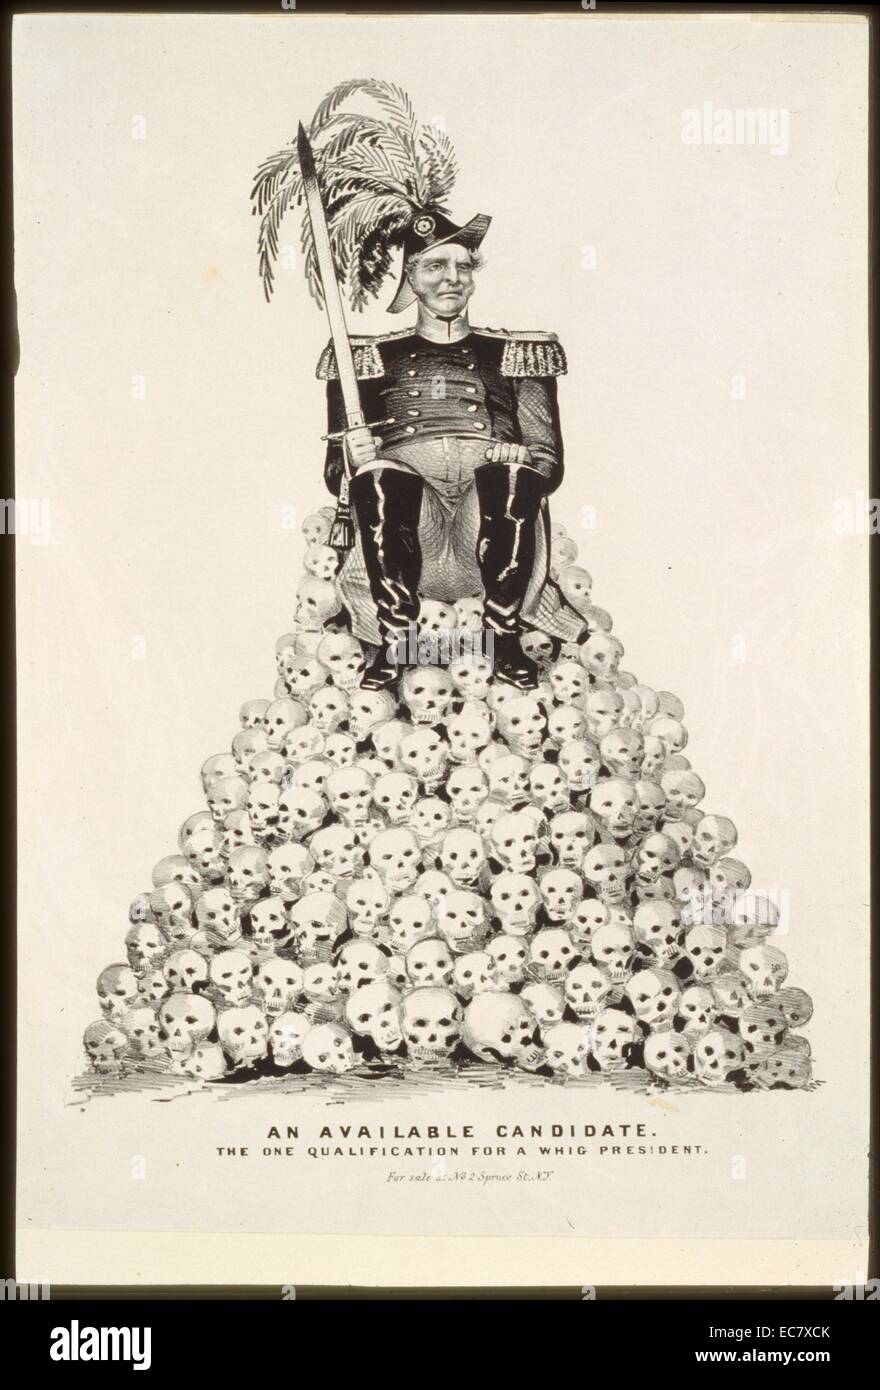 An available candidate--the one qualification for a Whig president' Political cartoon showing man in military uniform, with epaulets and plumed hat, holding sword and seated on pile of skulls. A scathing attack on Whig principles, as embodied in their selection of a presidential candidate for 1848. Here the 'available candidate' is either Gen. Zachary Taylor or Winfield Scott, both of whom were contenders for the nomination before the June convention. Stock Photo